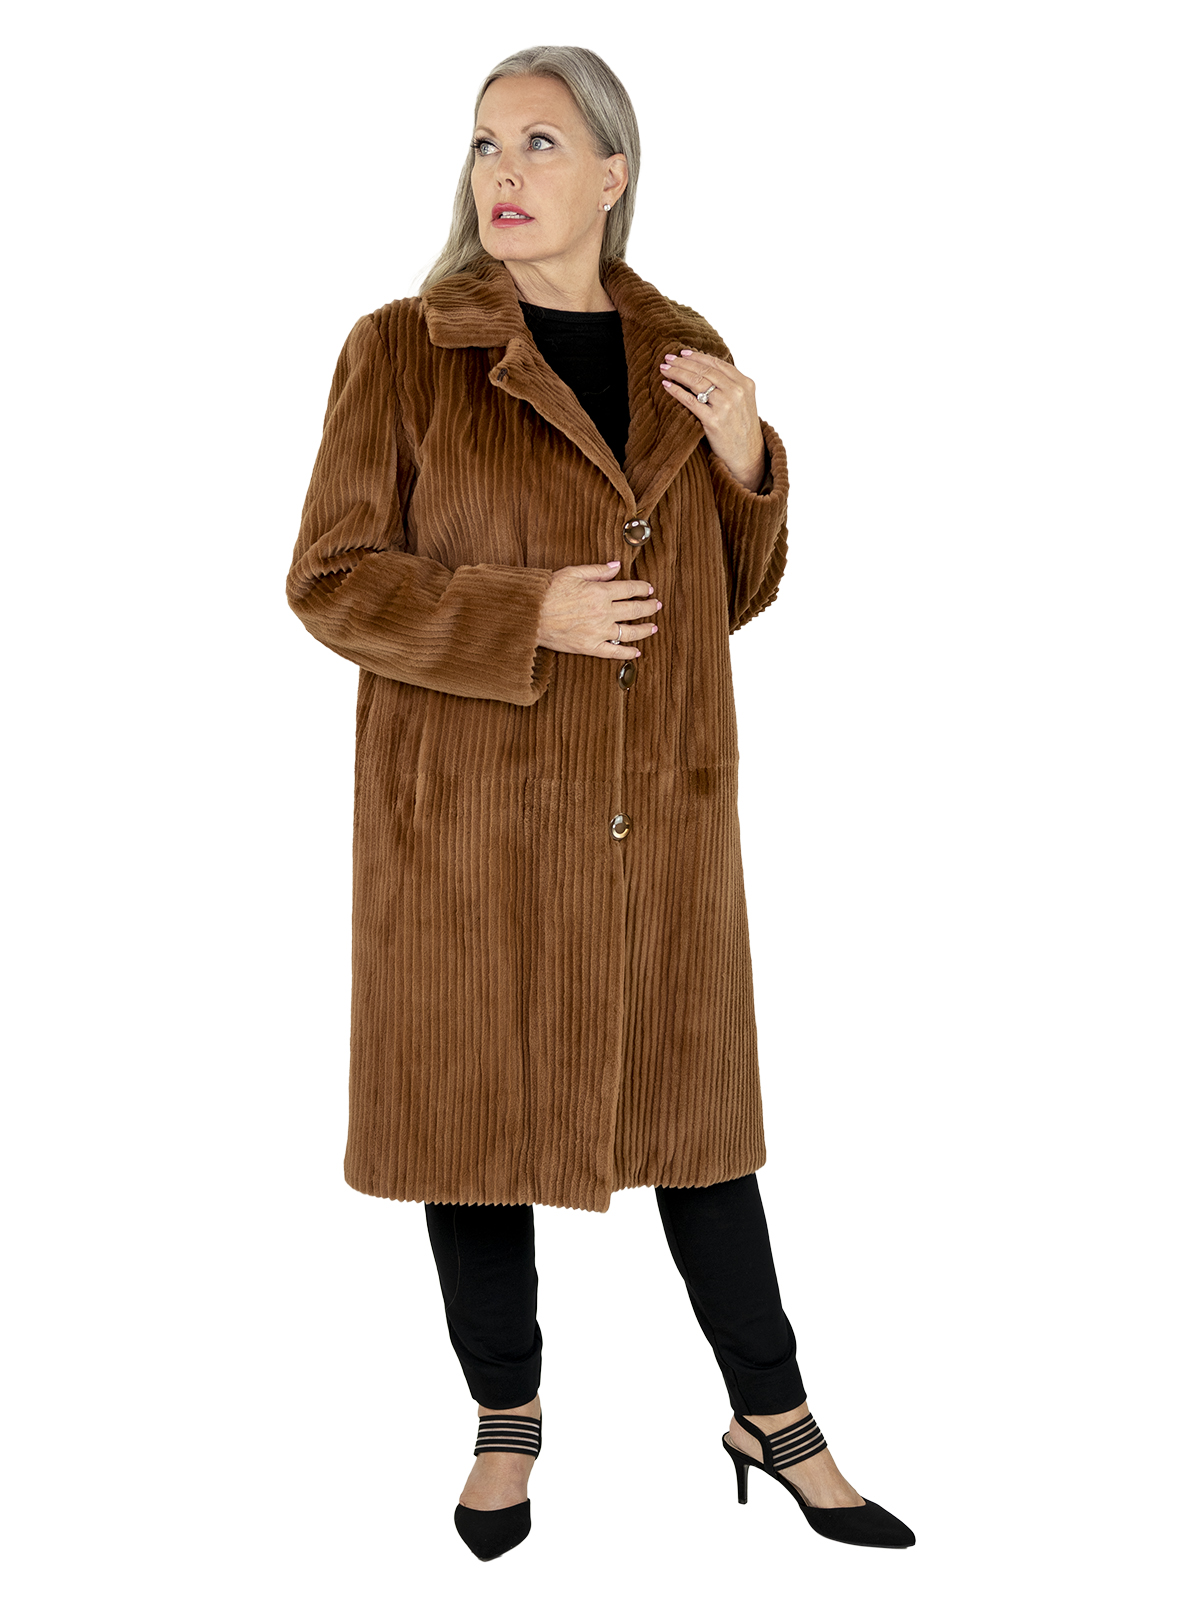 Woman's Whiskey Sheared and Grooved Mink Fur 7/8 Coat Reversible to Rain Fabric